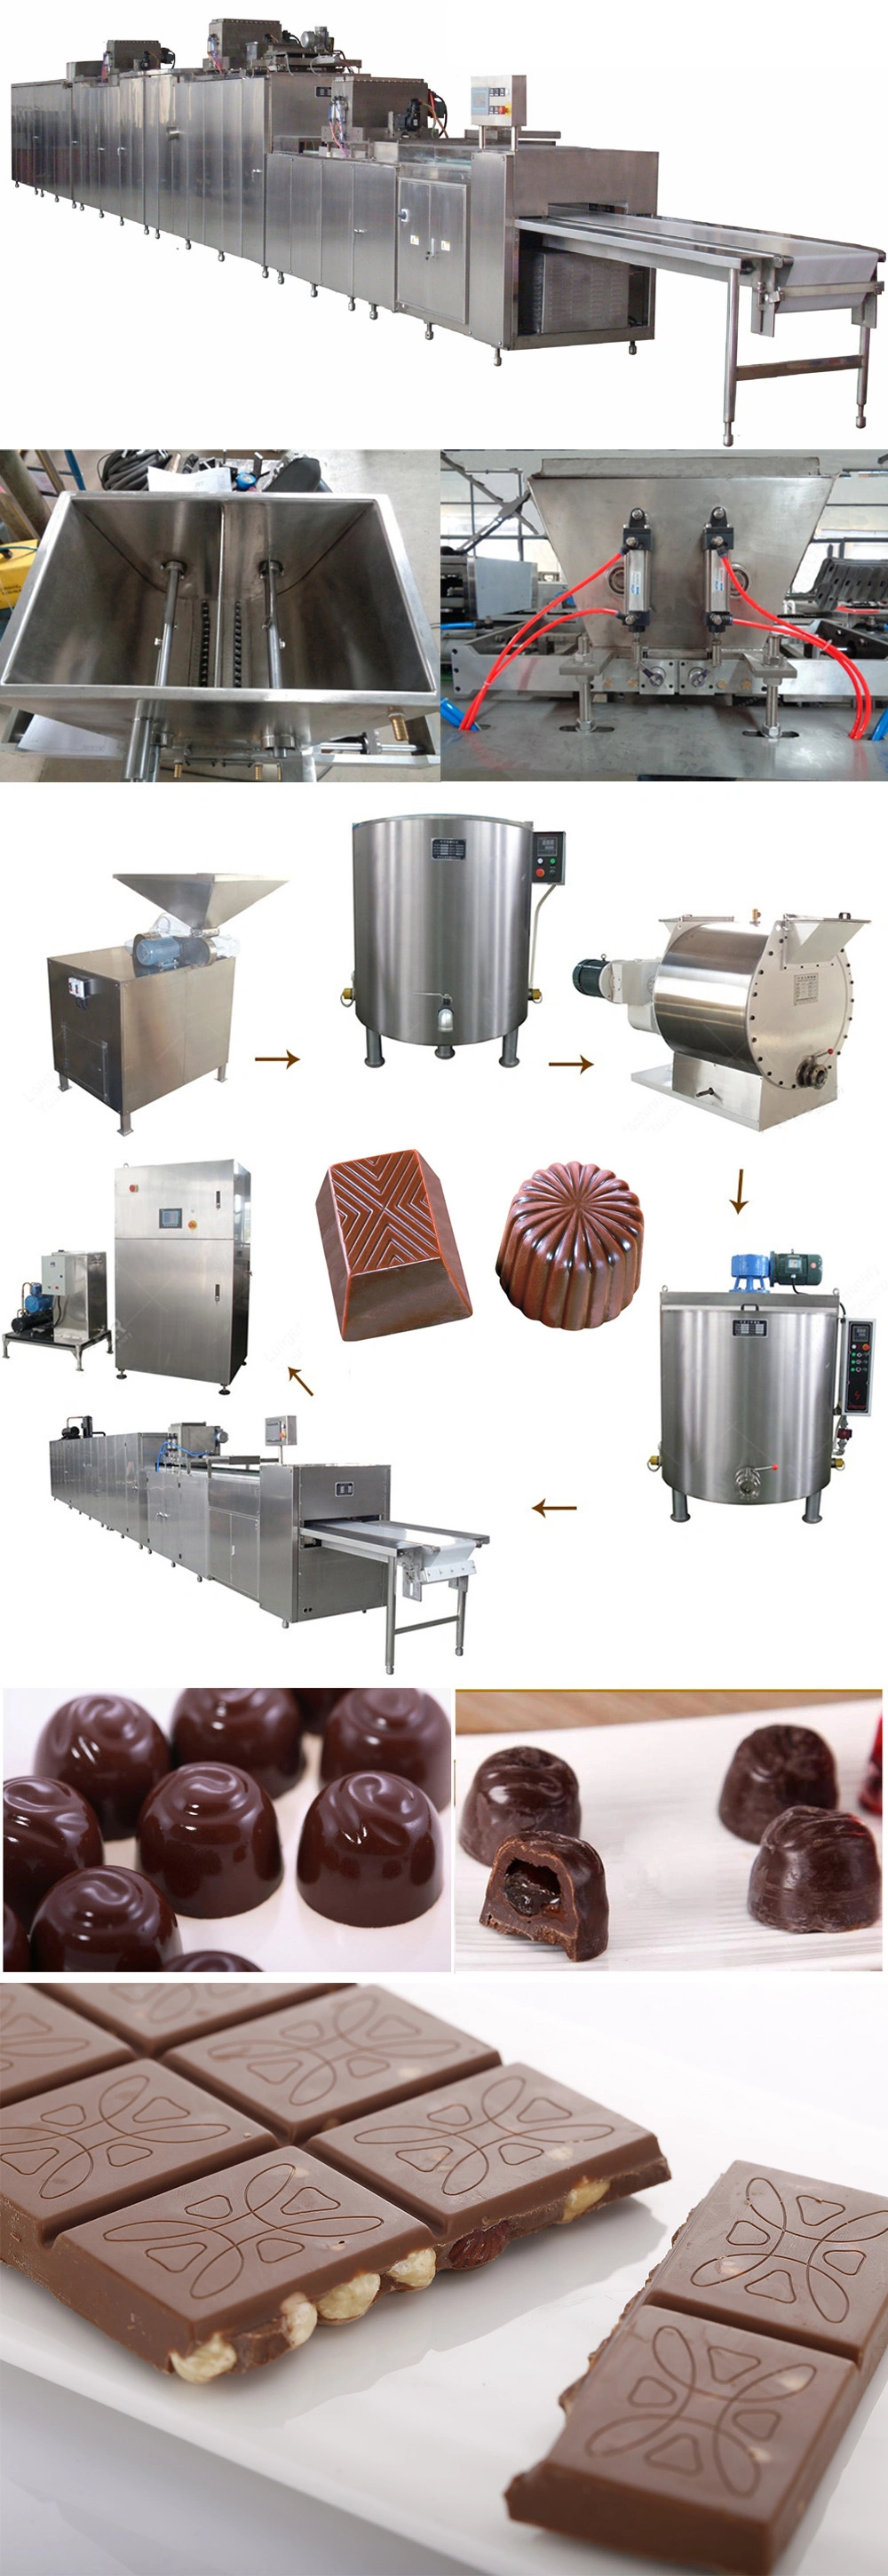 Chocolate Paste Refining, Chocolate Processing and Making Machine with Nuts Feeder